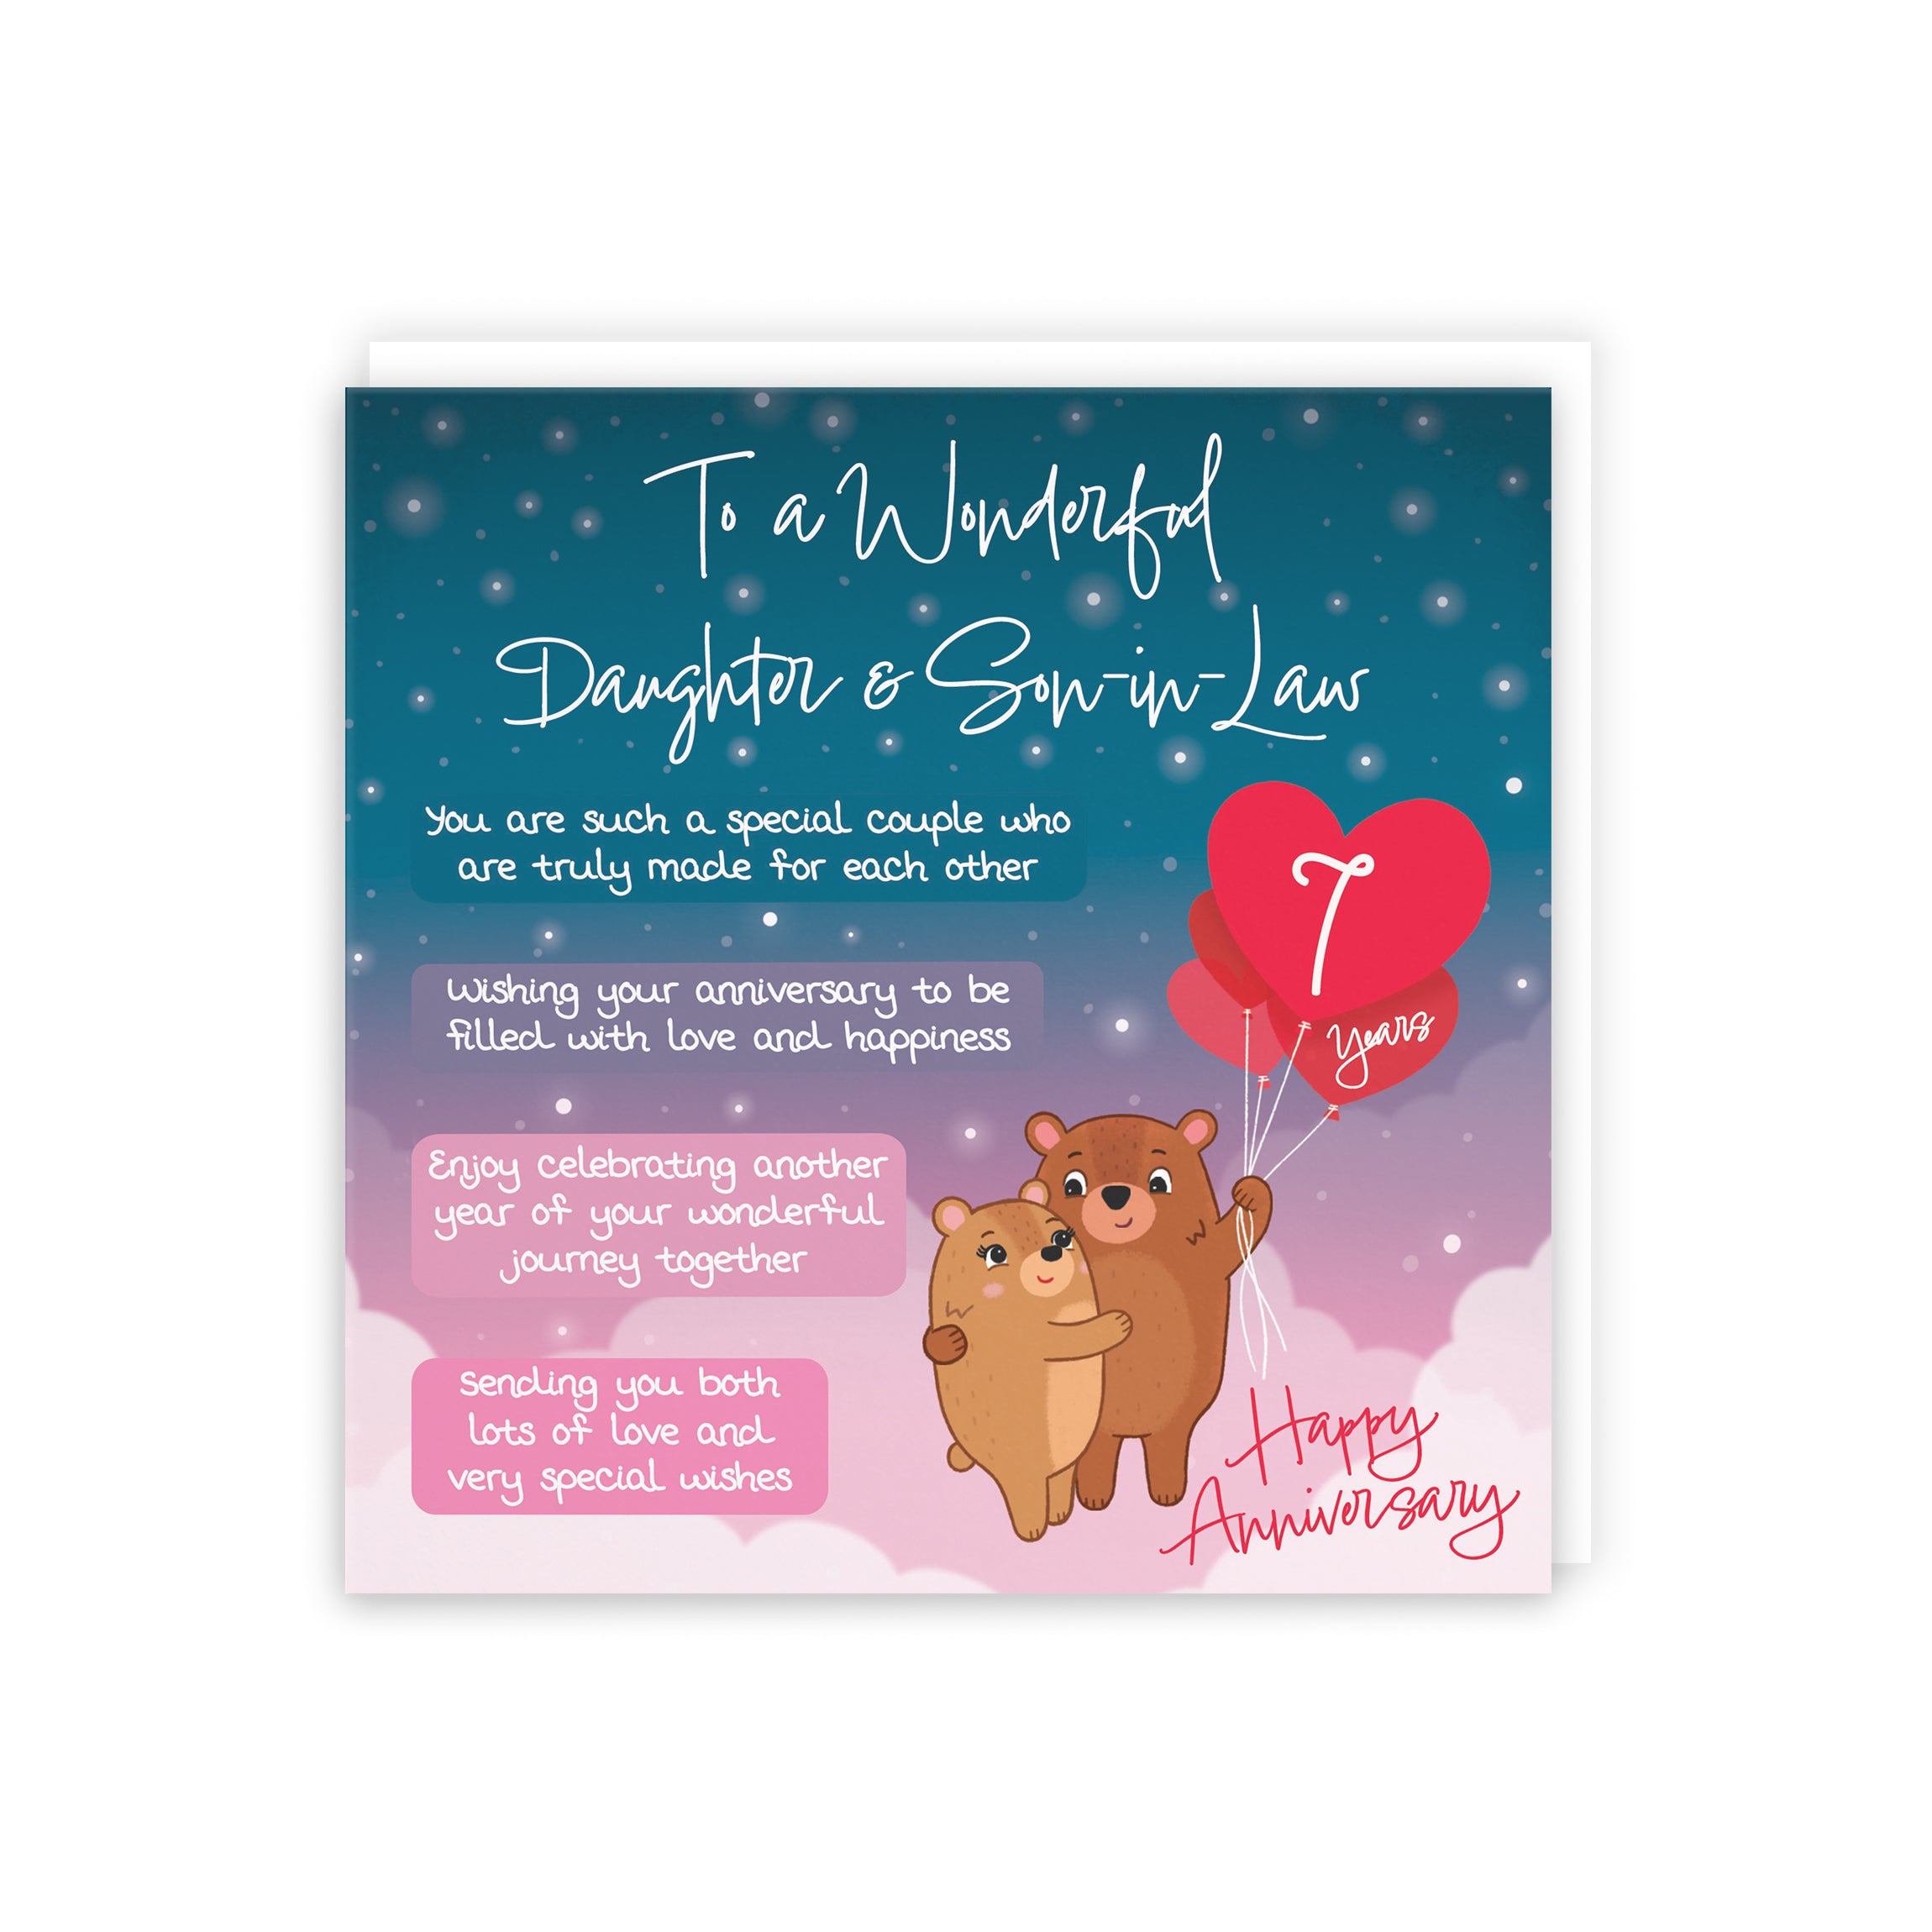 Daughter And Son In Law 7th Anniversary Card Starry Night Cute Bears